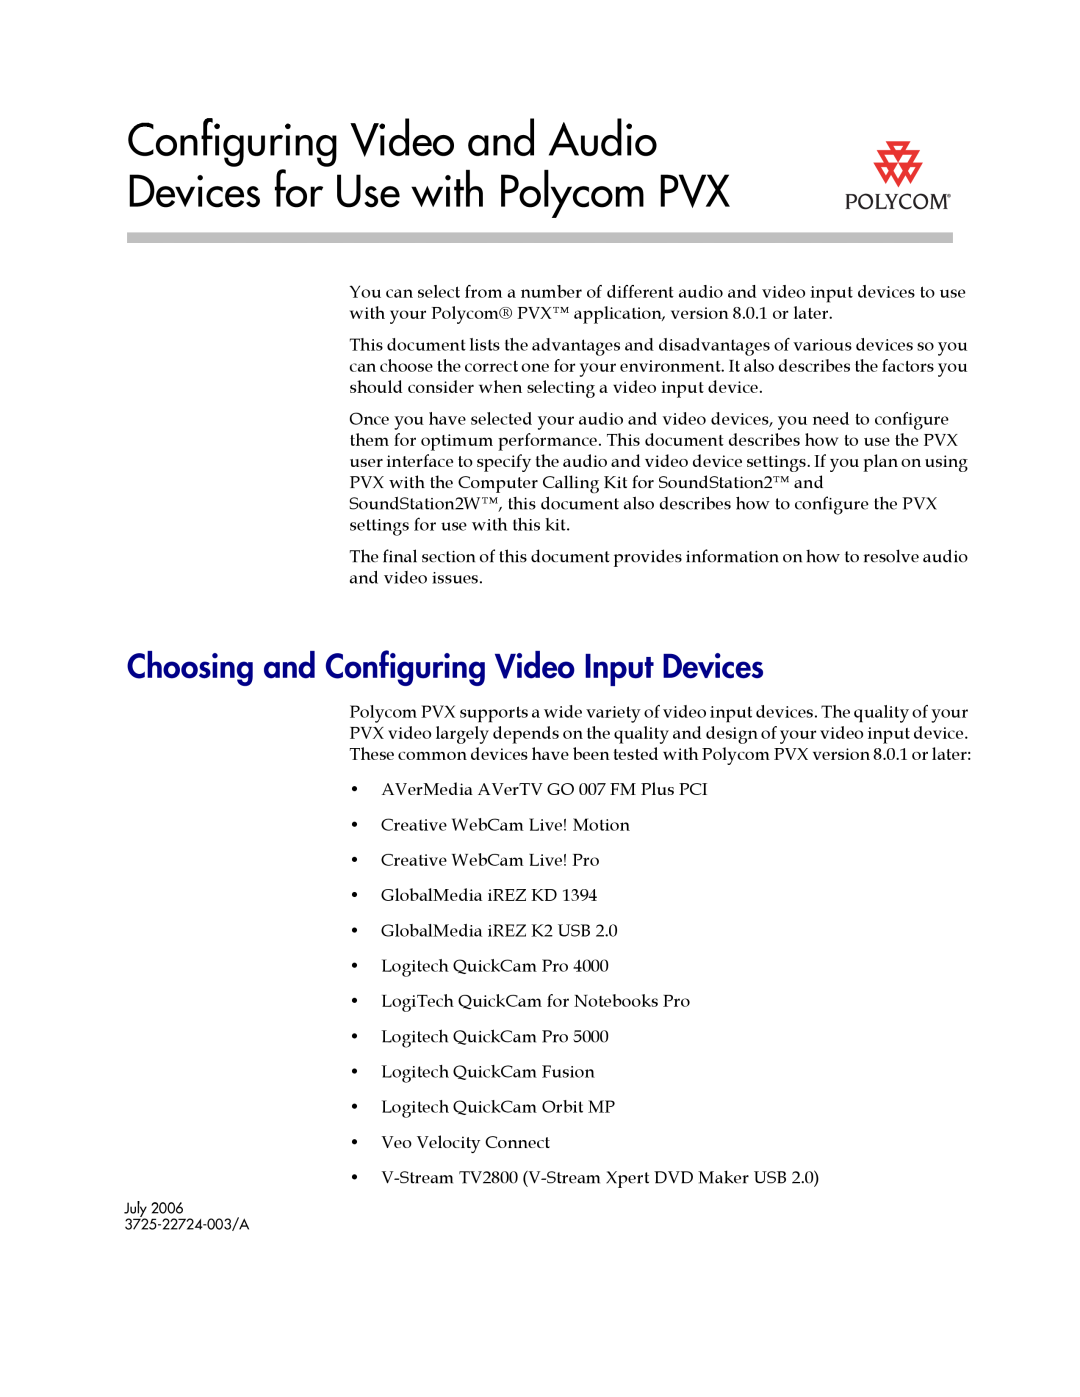 Polycom 3725-22724-003/A manual Choosing and Configuring Video Input Devices 